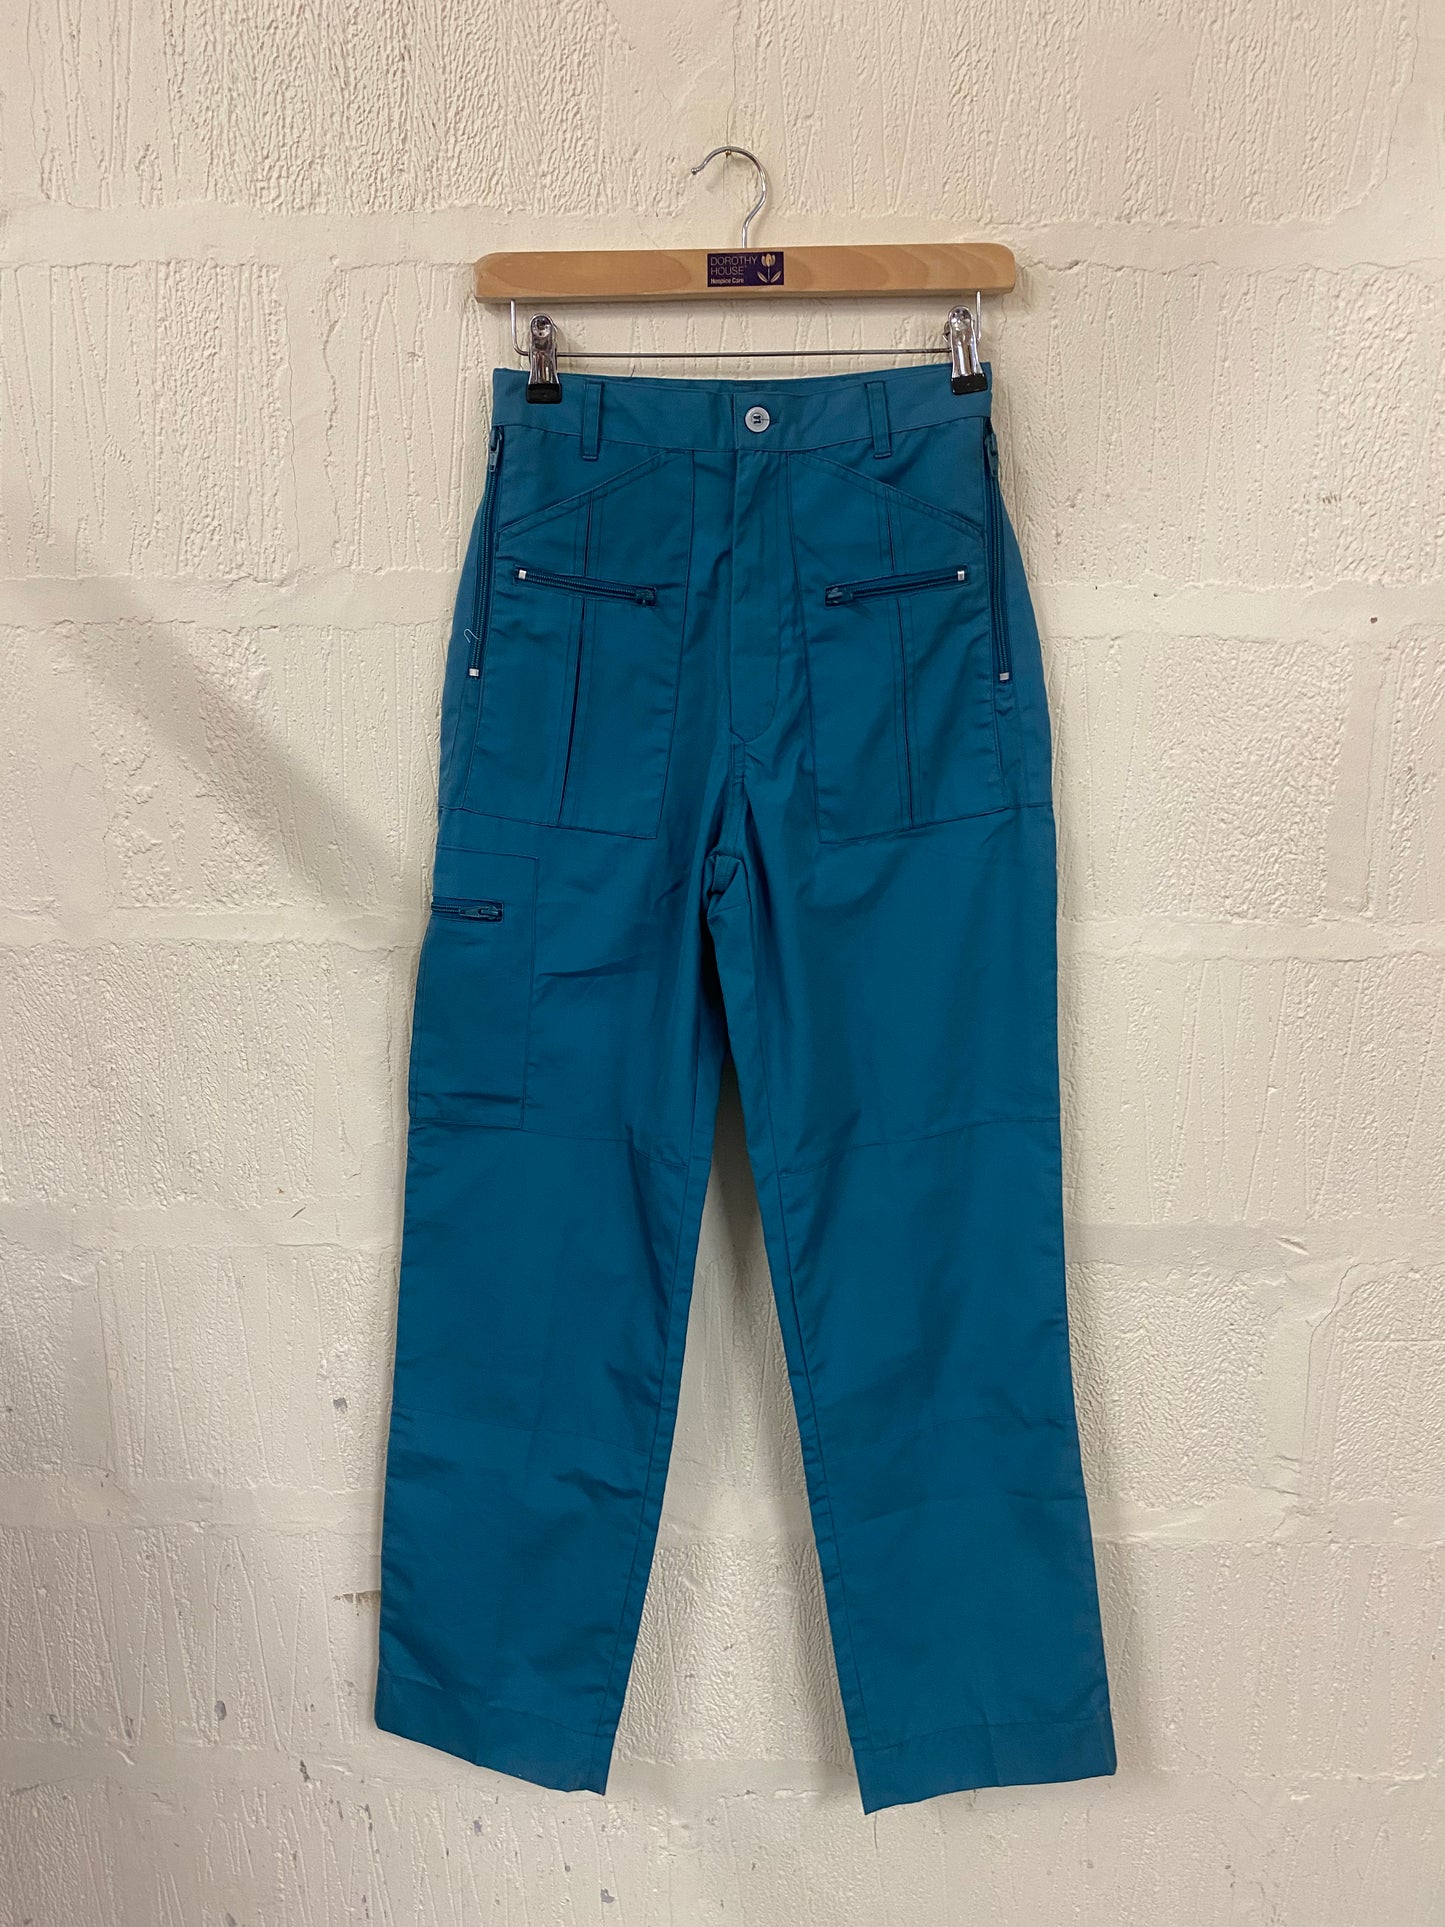 Vintage Teal  Hiking Trousers with Zips  Size 6-8